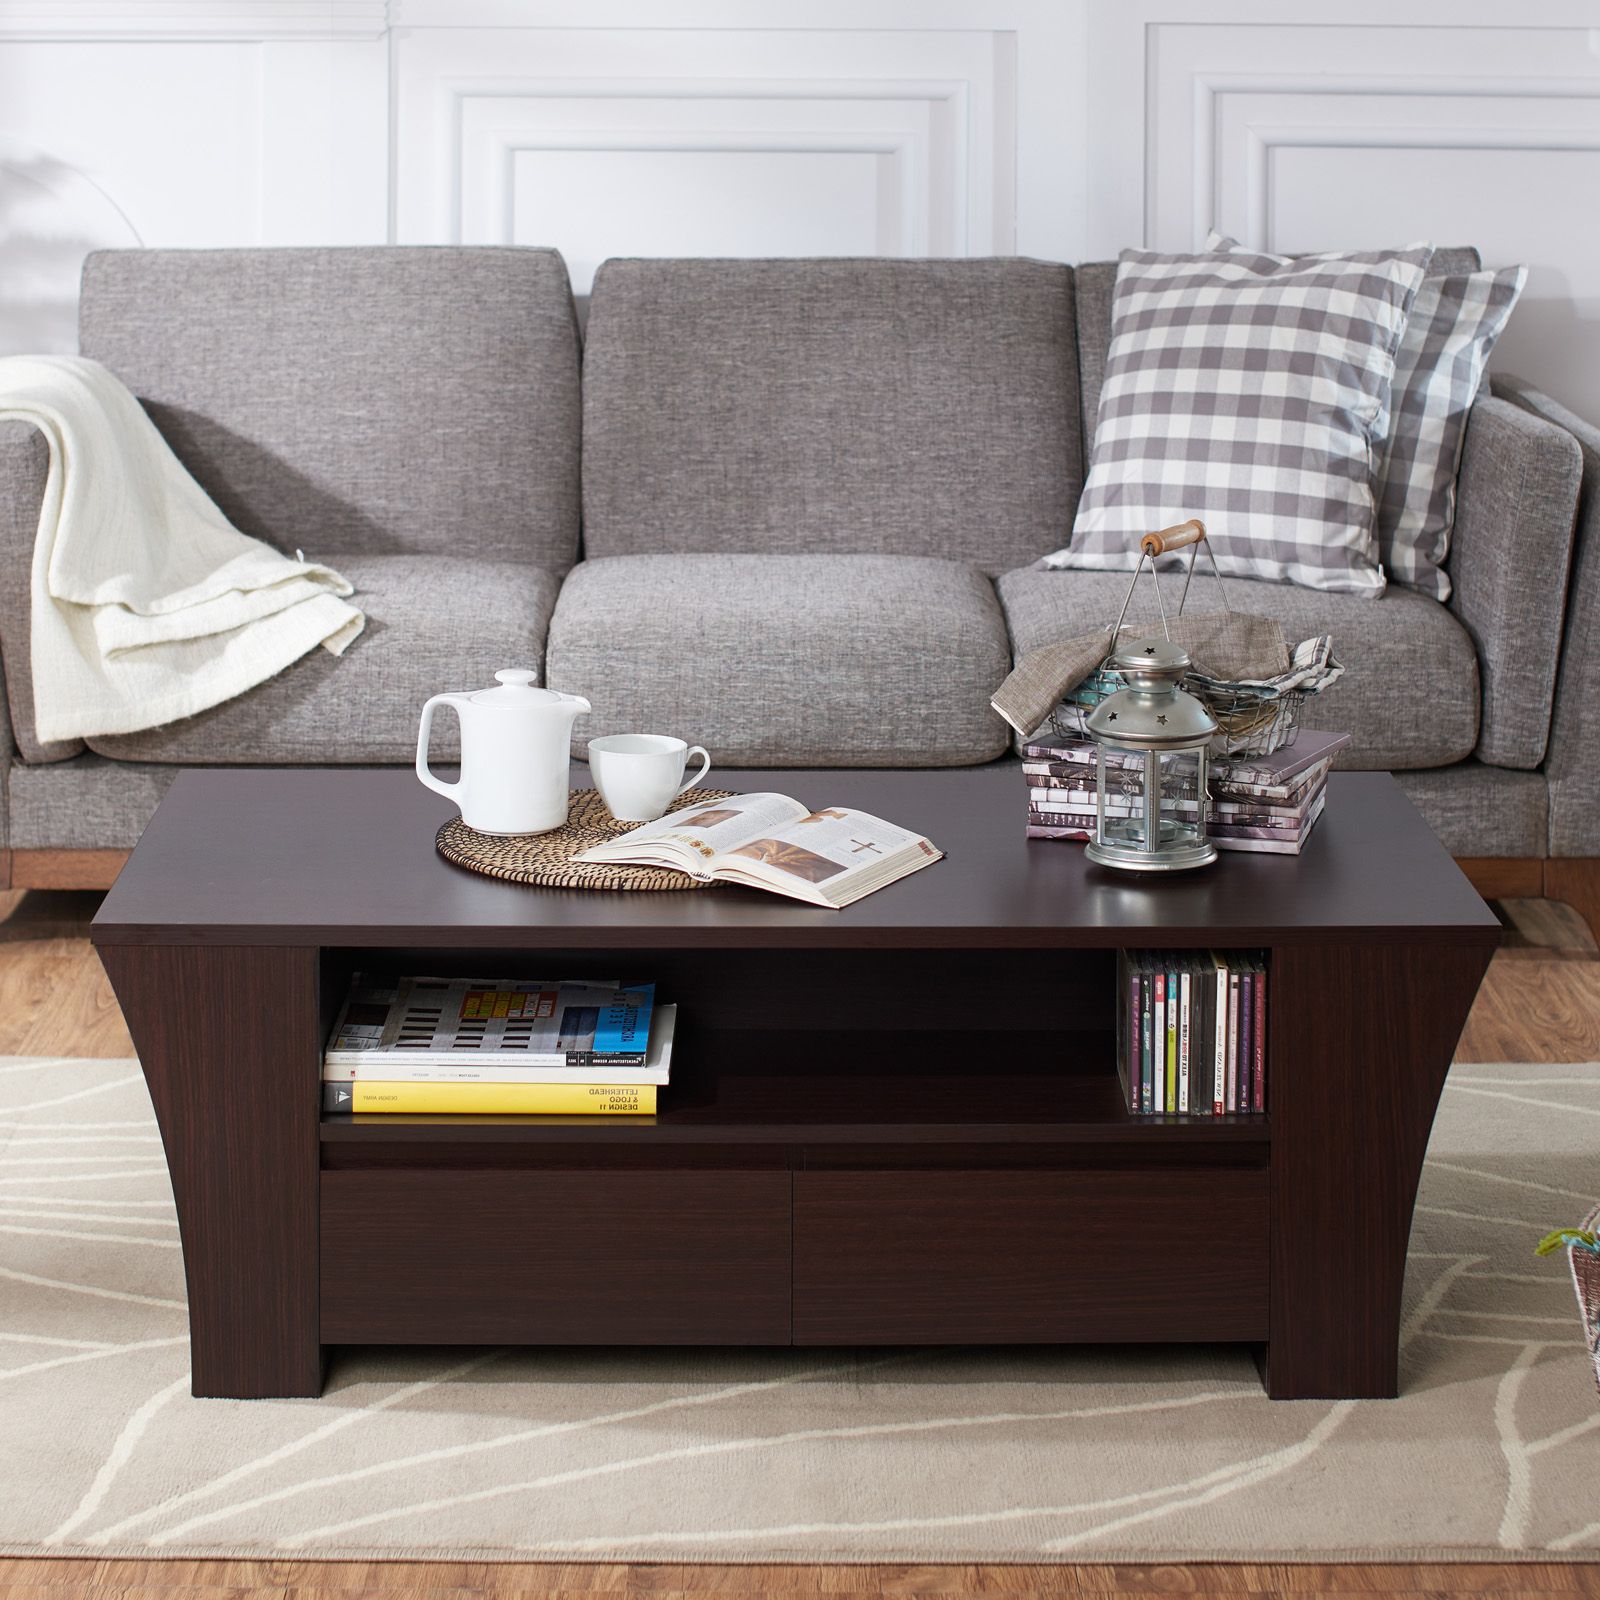 Furniture Of America 2 Drawer Coffee Table – Coffee Tables Throughout Current 2 Drawer Coffee Tables (Gallery 8 of 20)